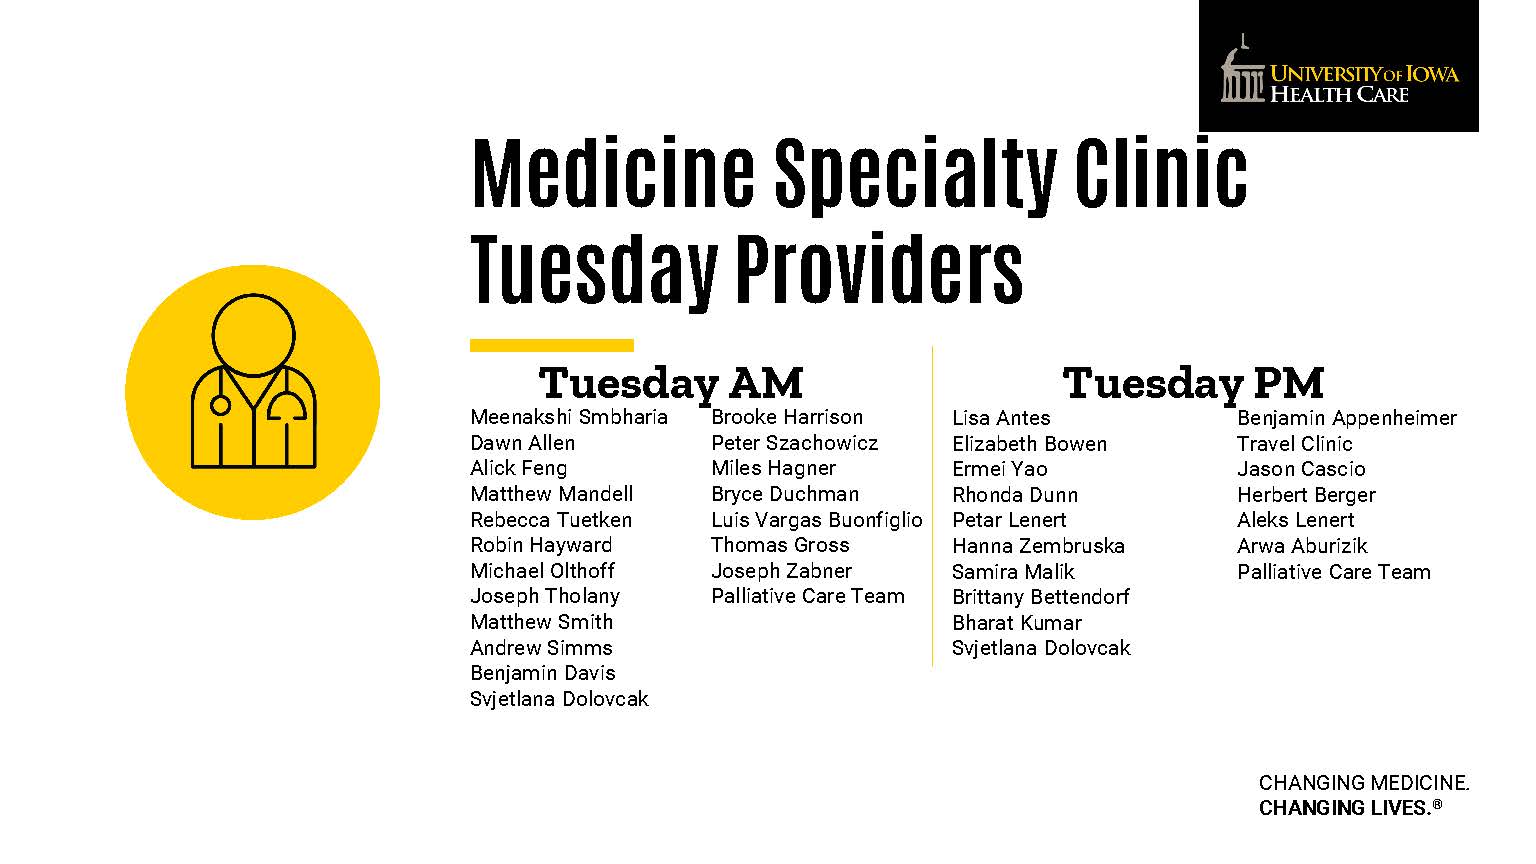 MSC Tuesday providers